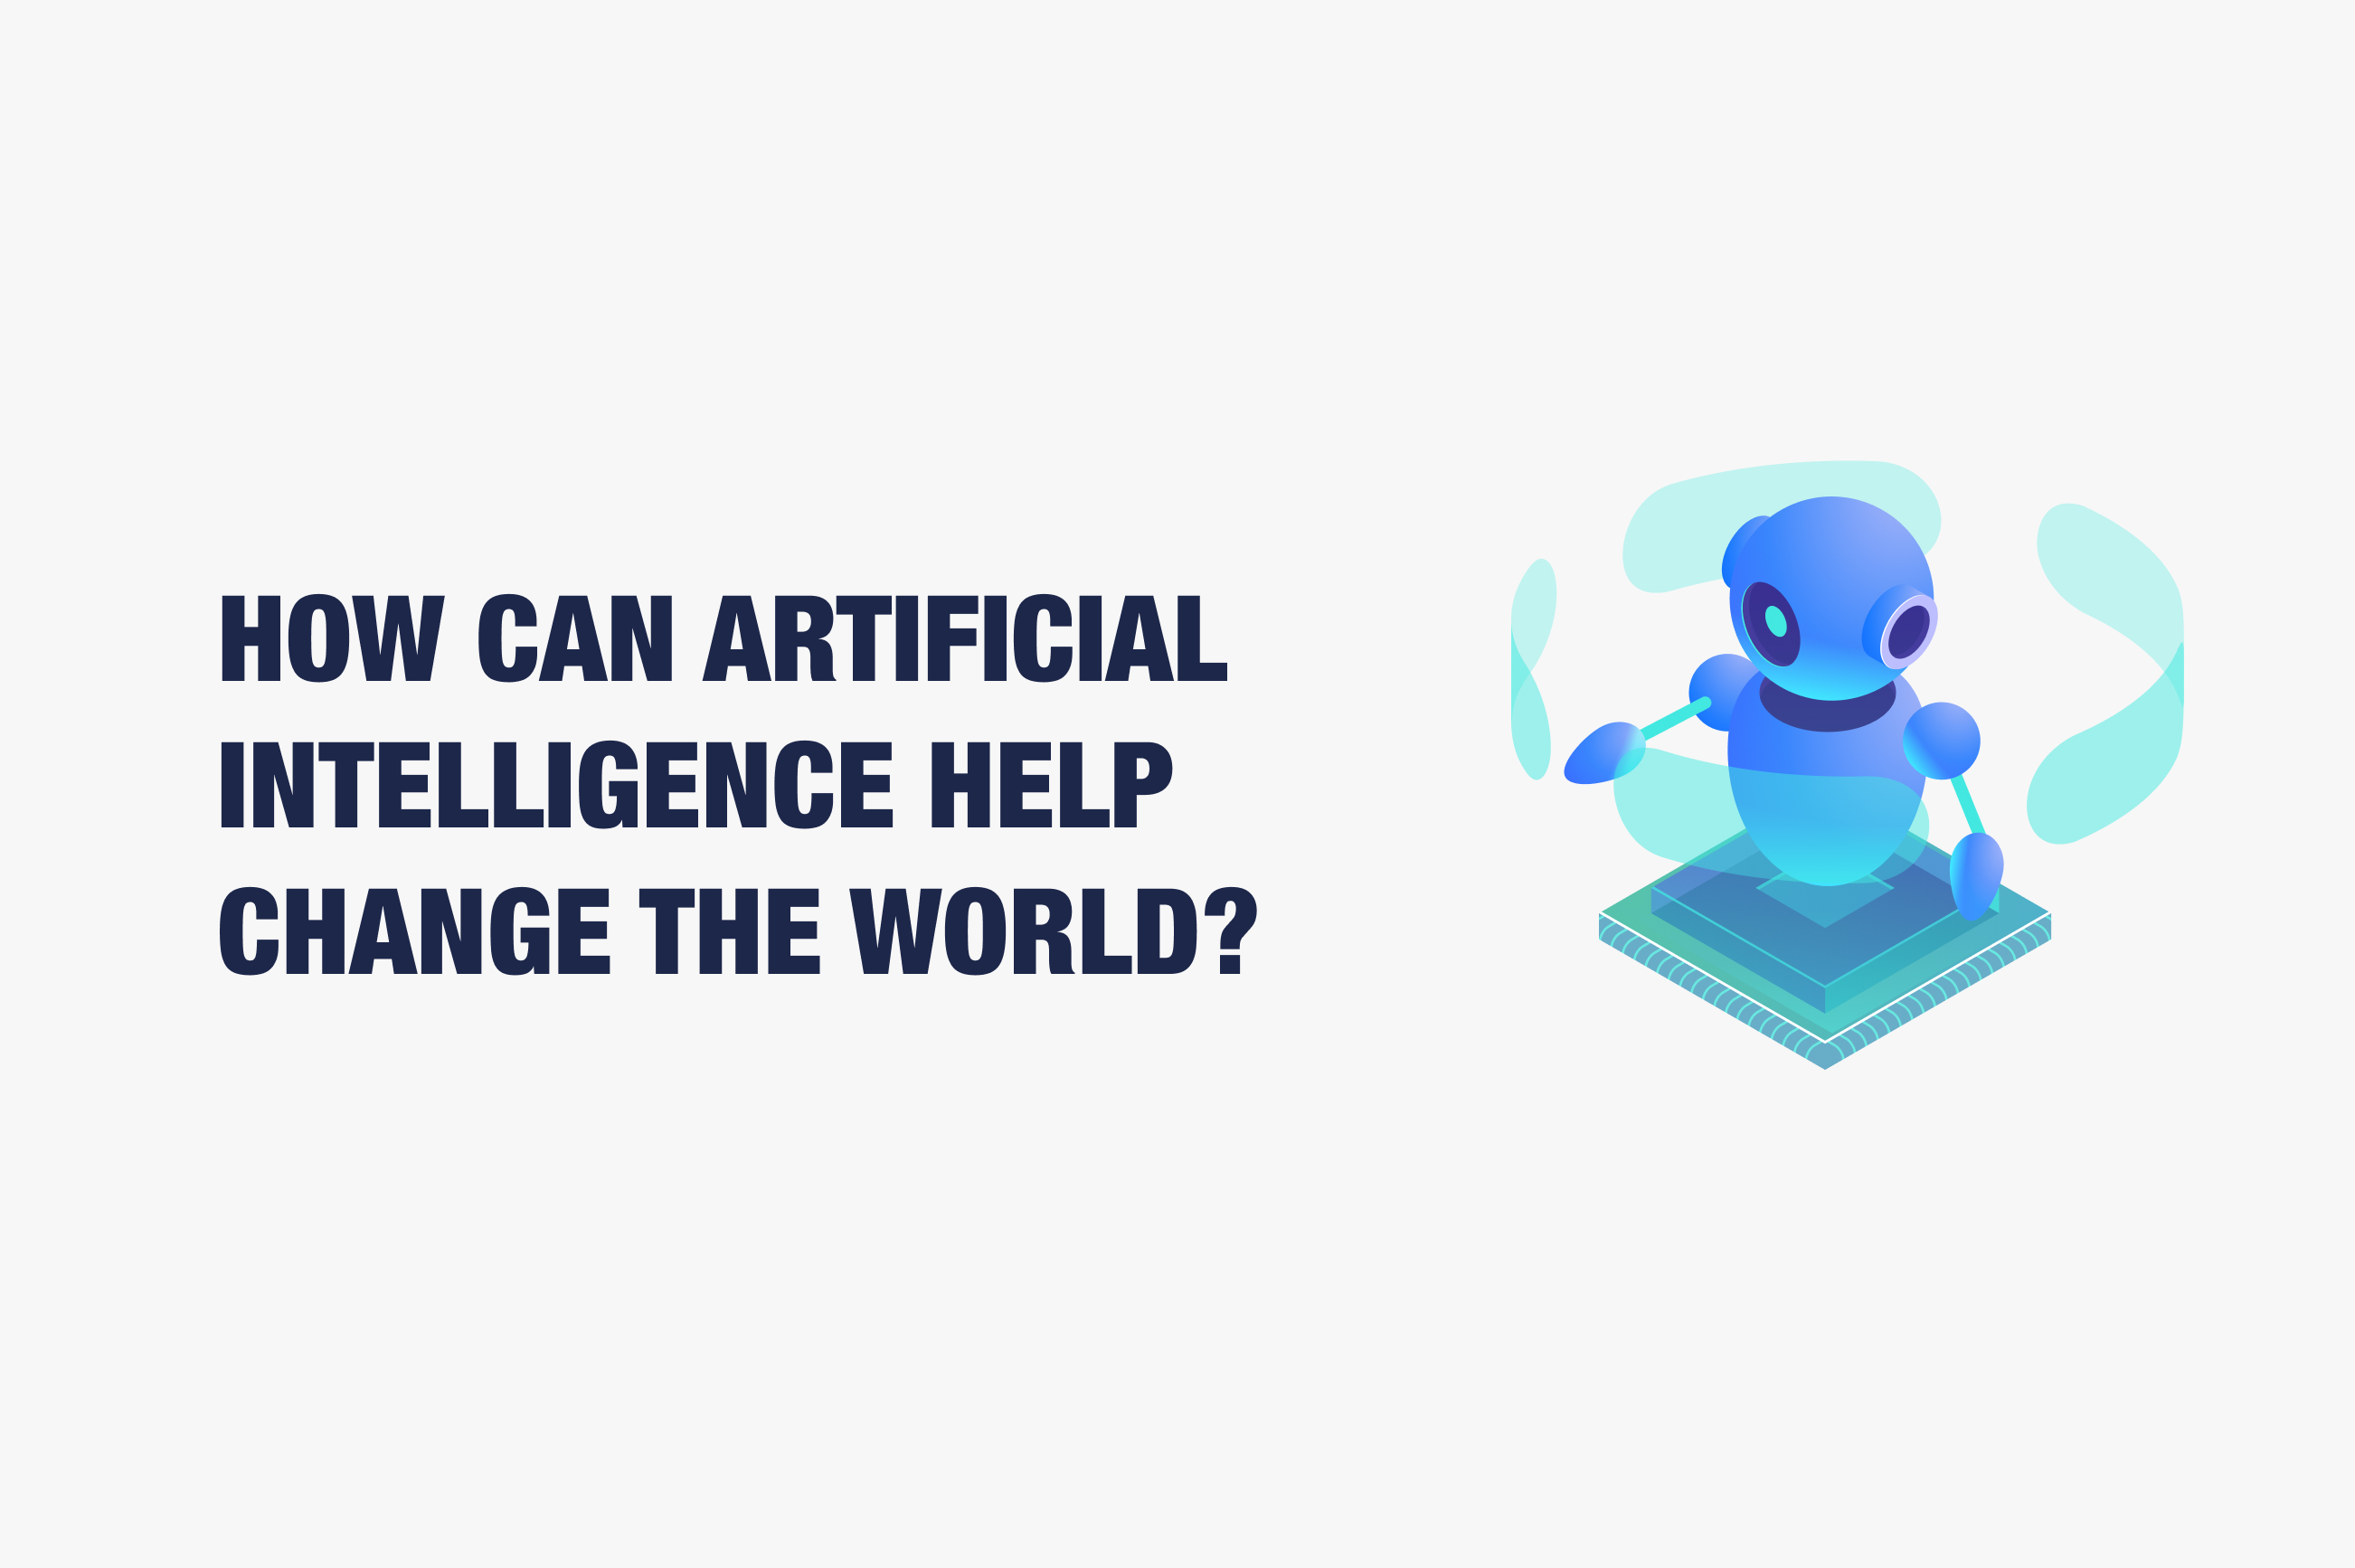 How Can Artificial Intelligence Help Change the World?